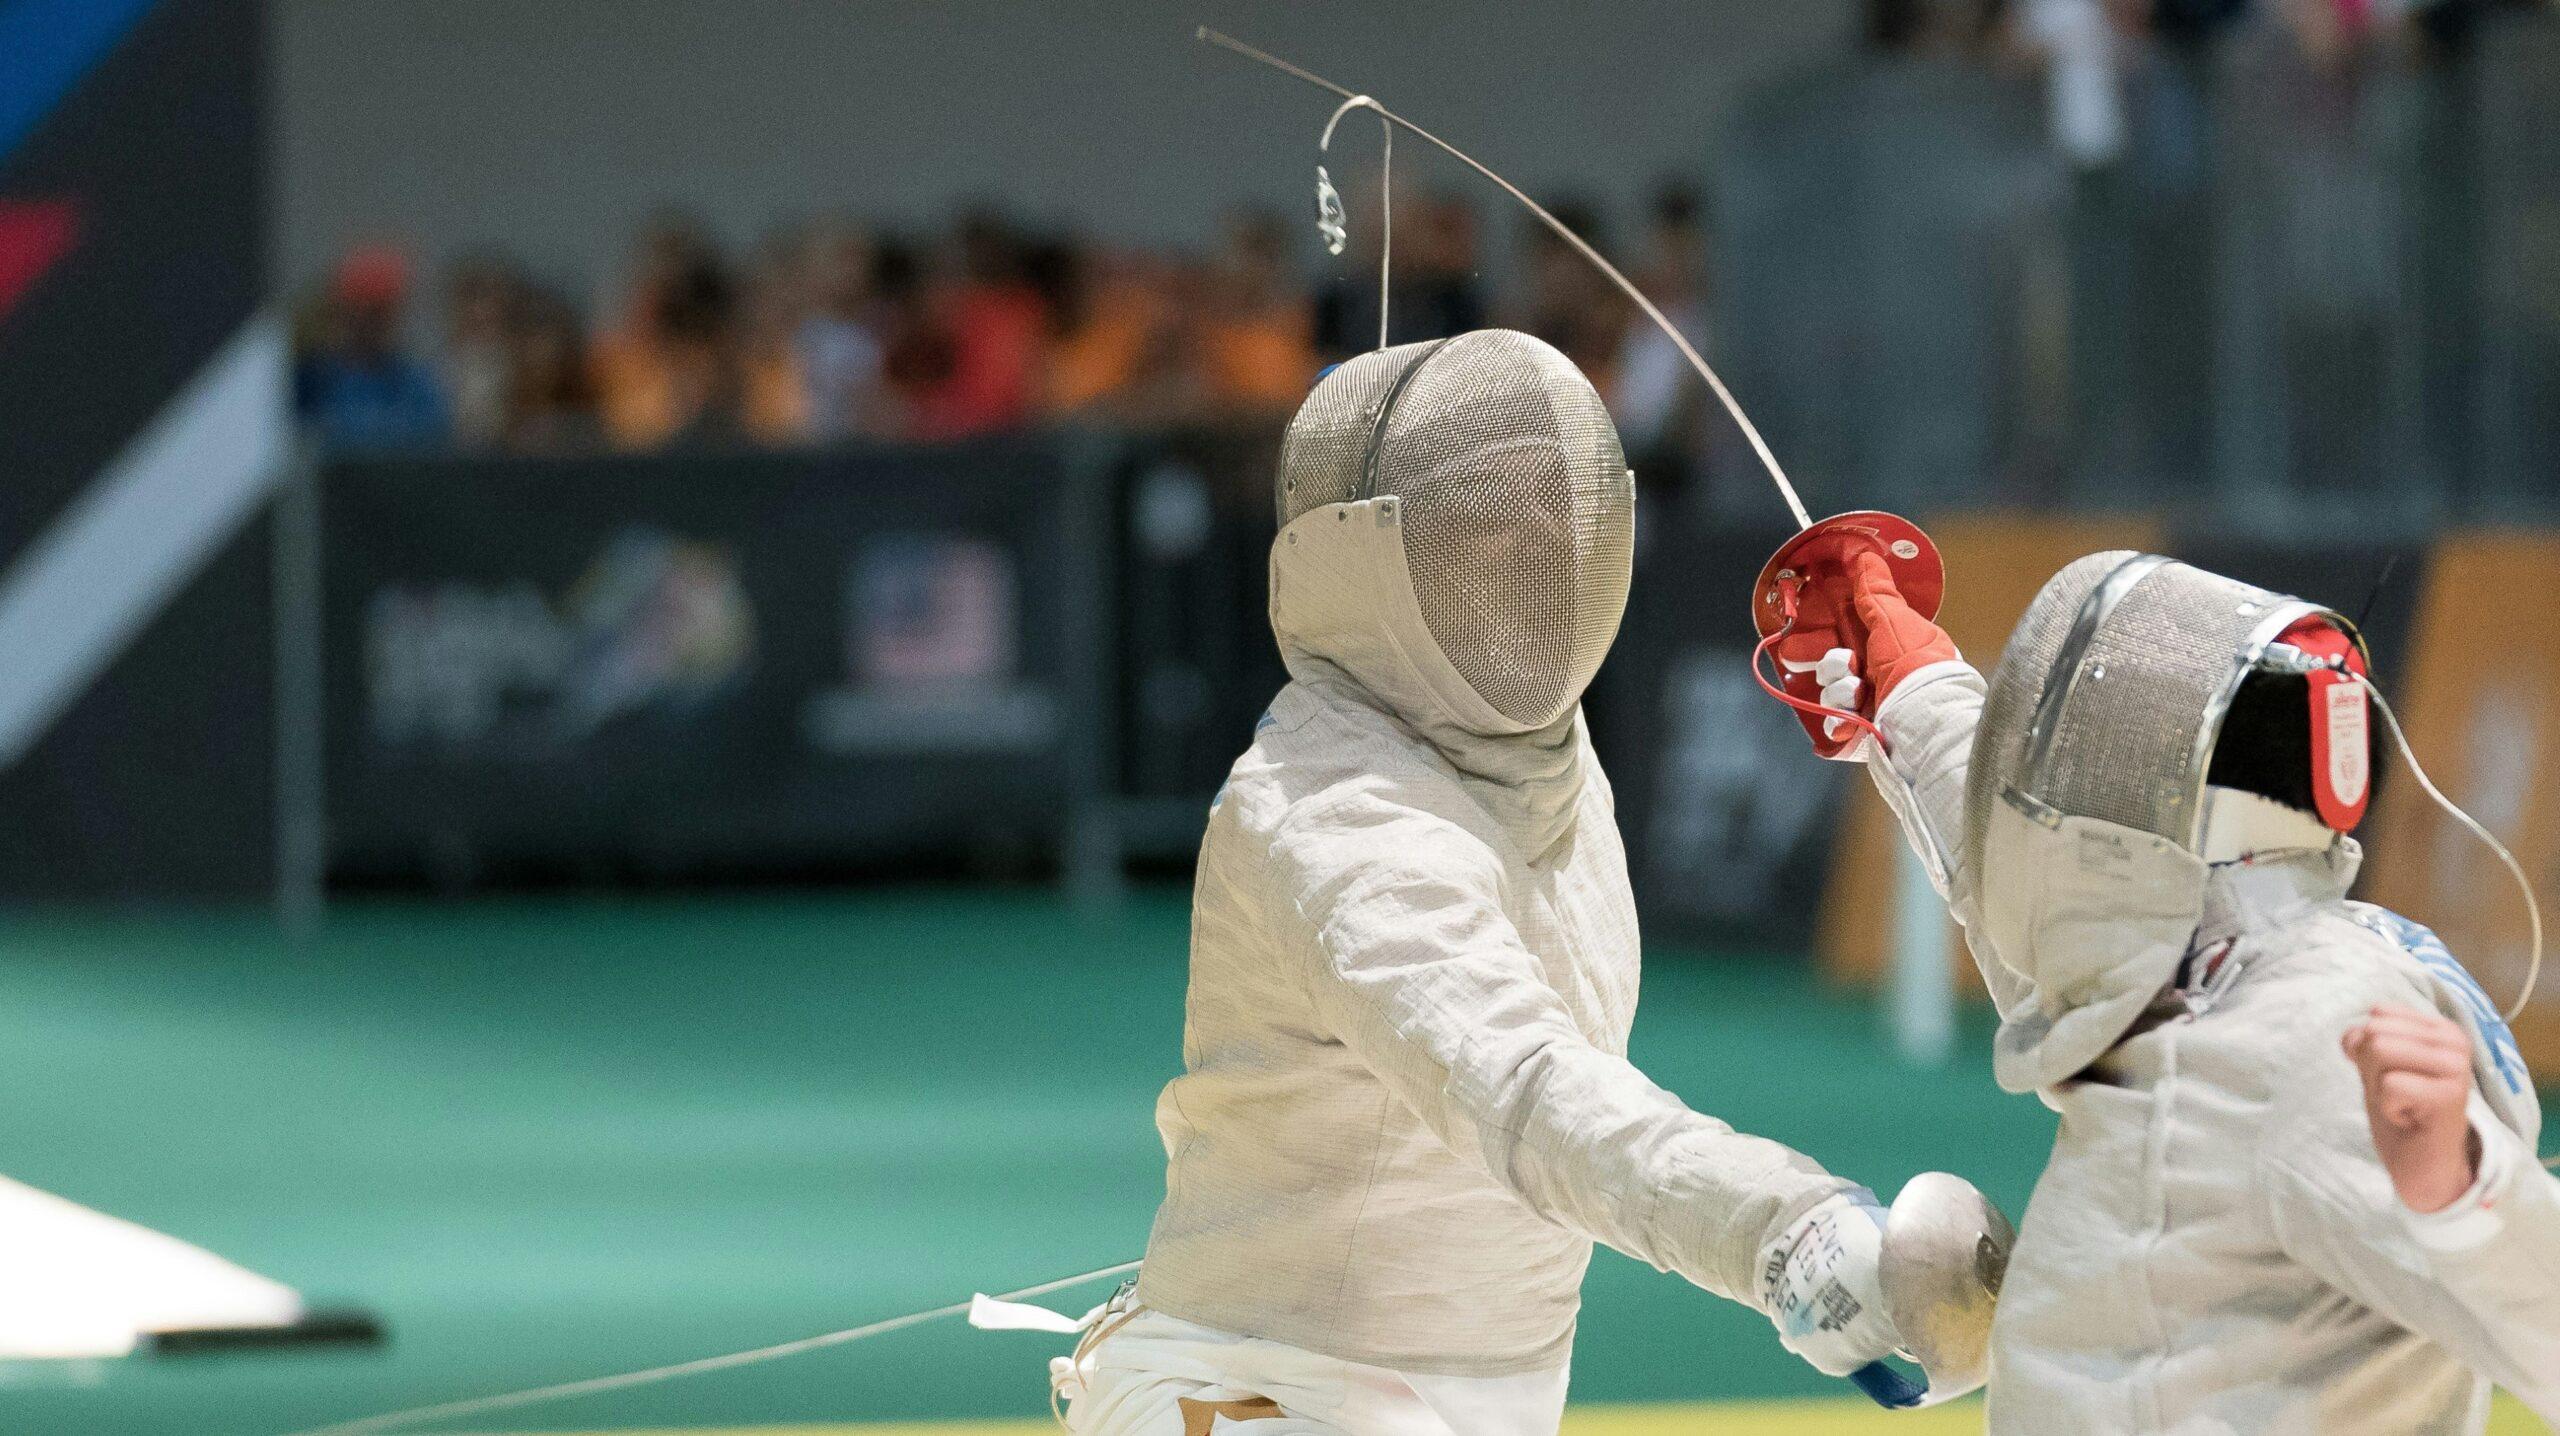 Two competitors battle in a fencing competition.